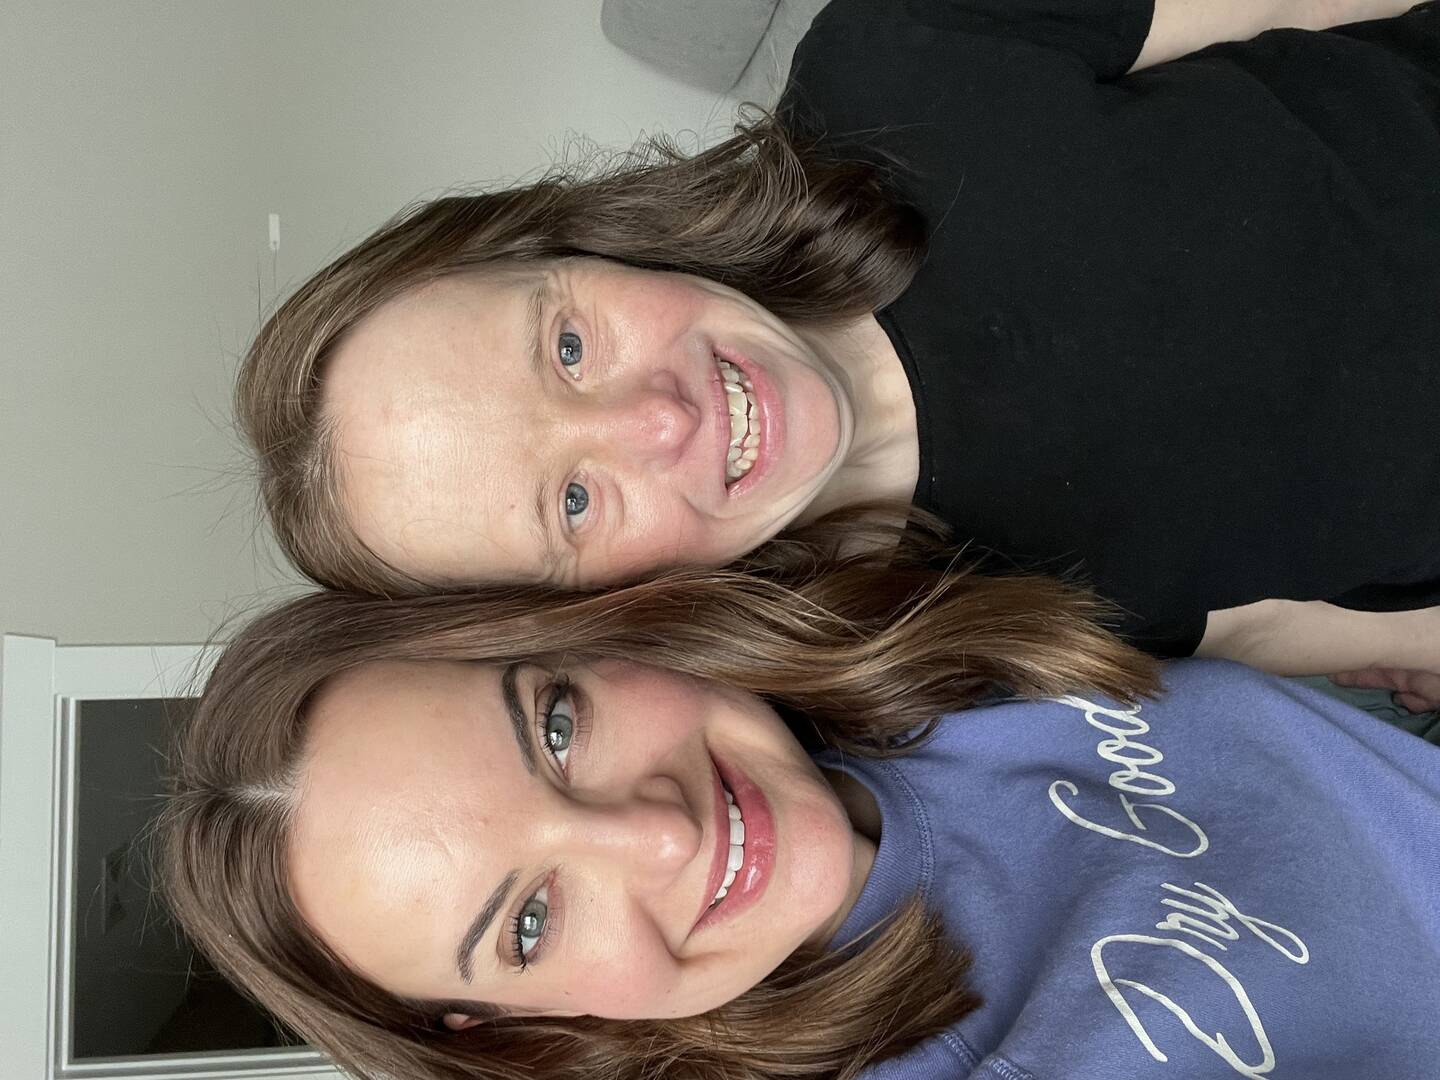 the author smiles with her sister leanne. the author's shirt says dry goods in a scripted font, and leanne is wearing black. leanne has down syndrome